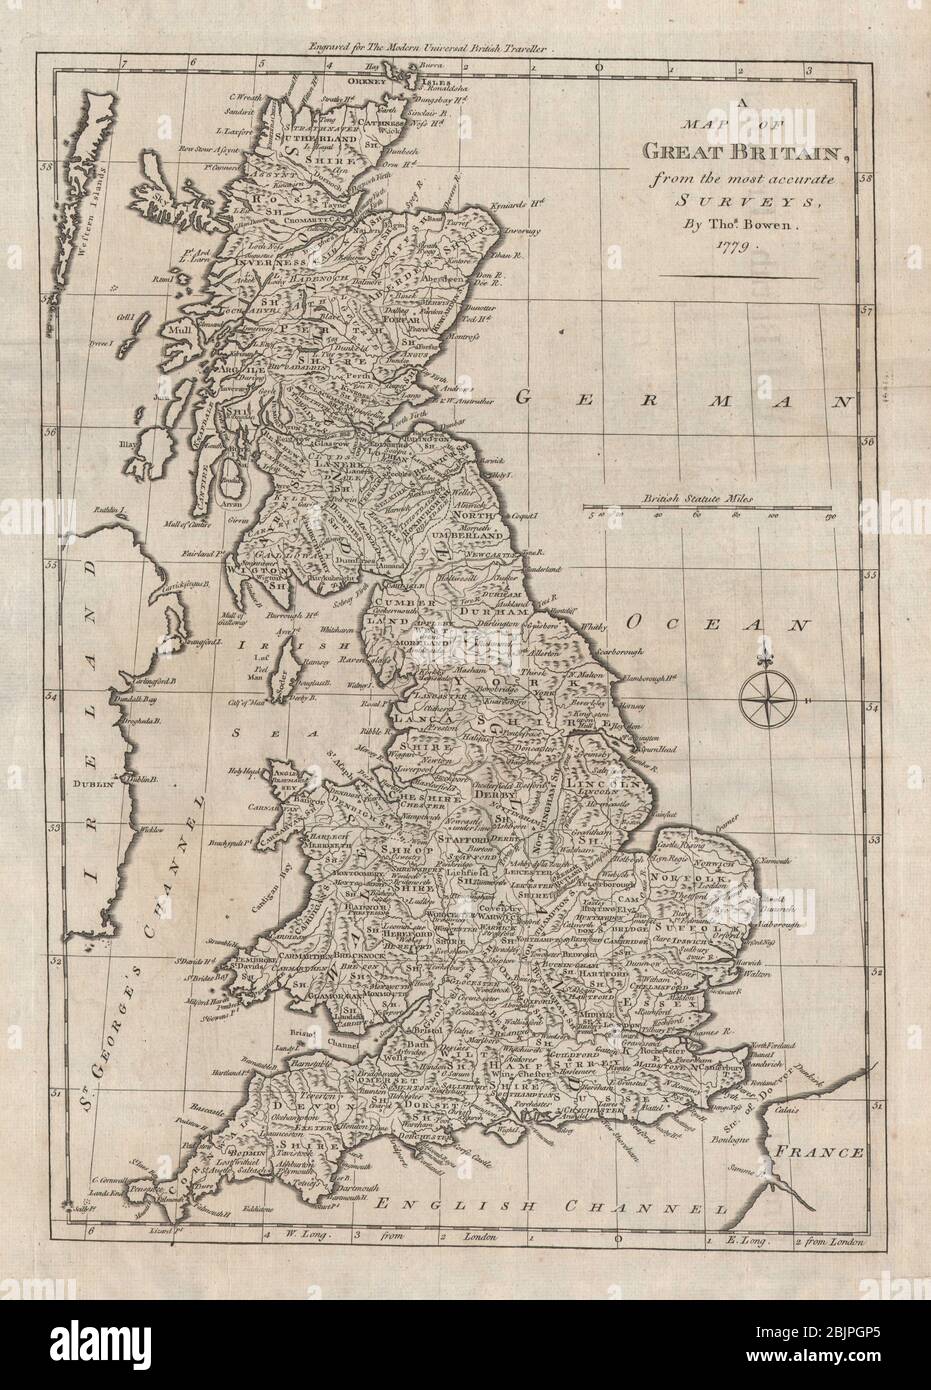 A map of Great Britain from the most accurate surveys, by Thomas BOWEN 1779 Stock Photo